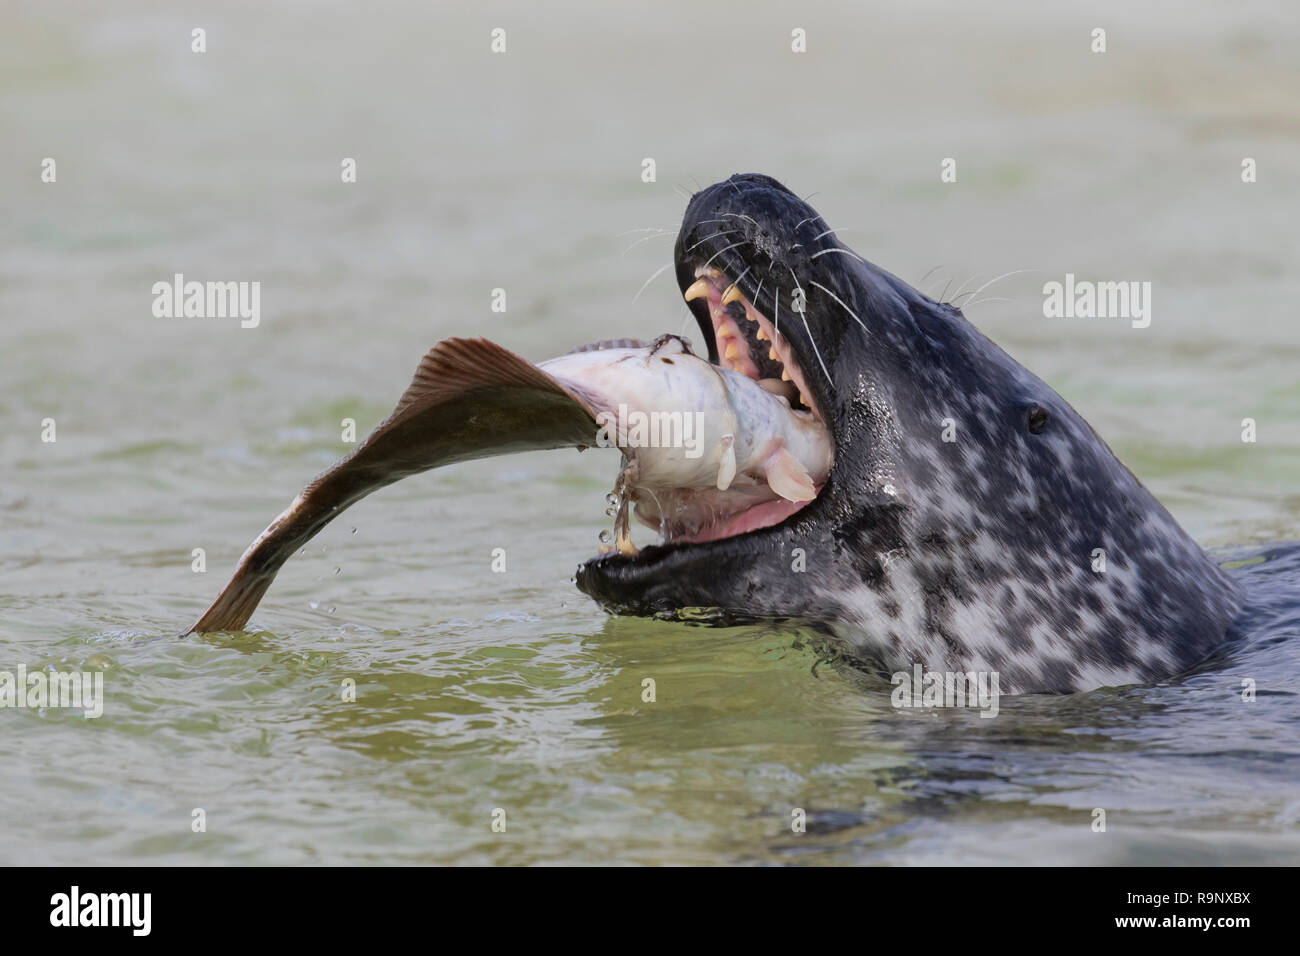 Close up of common seal / harbour seal (Phoca vitulina) swallowing flatfish, Seal Centre Friedrichskoog, Schleswig-Holstein, Germany Stock Photo